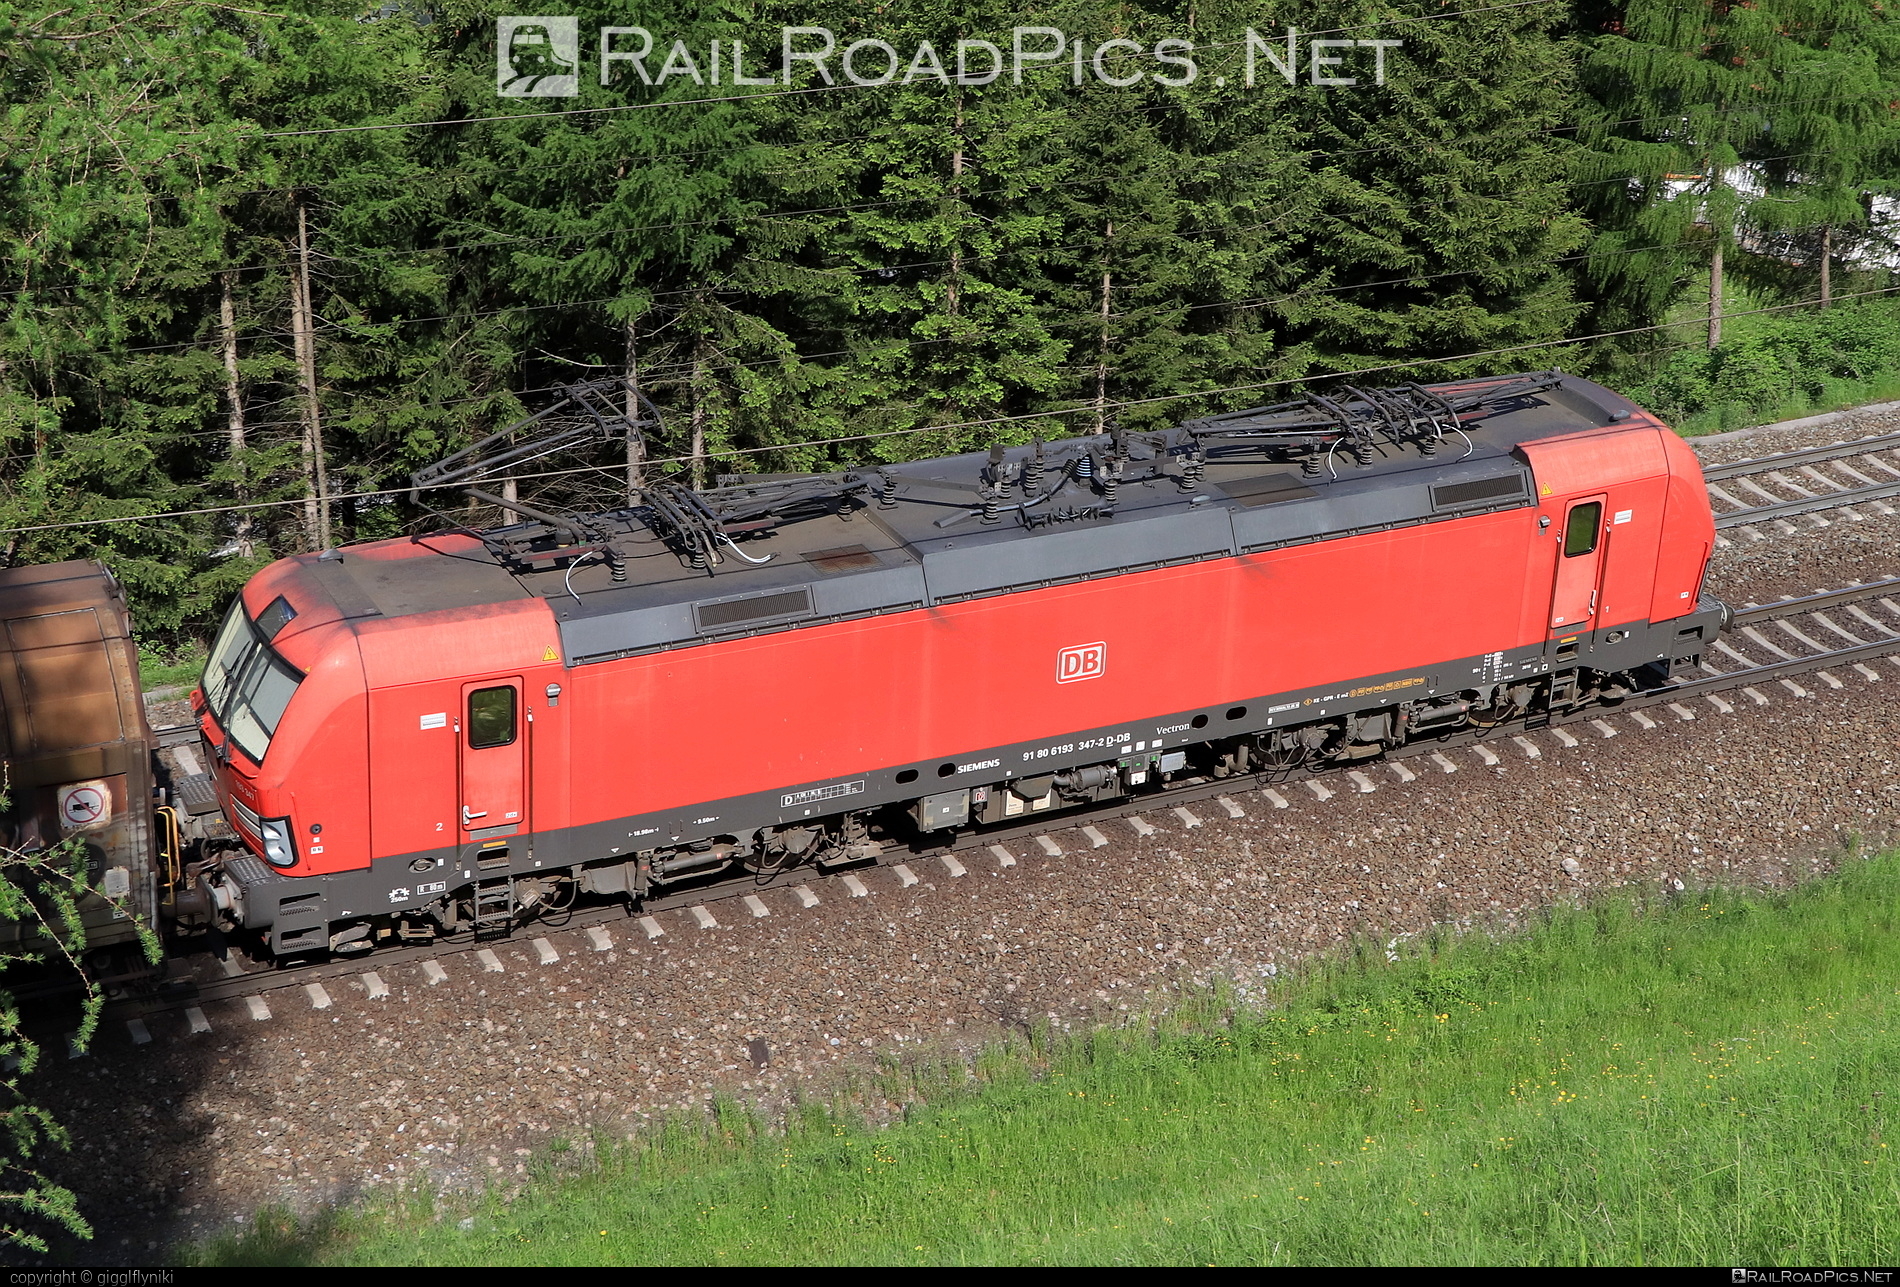 Siemens Vectron MS - 193 347 operated by DB Cargo AG #db #dbcargo #dbcargoag #deutschebahn #siemens #siemensVectron #siemensVectronMS #vectron #vectronMS